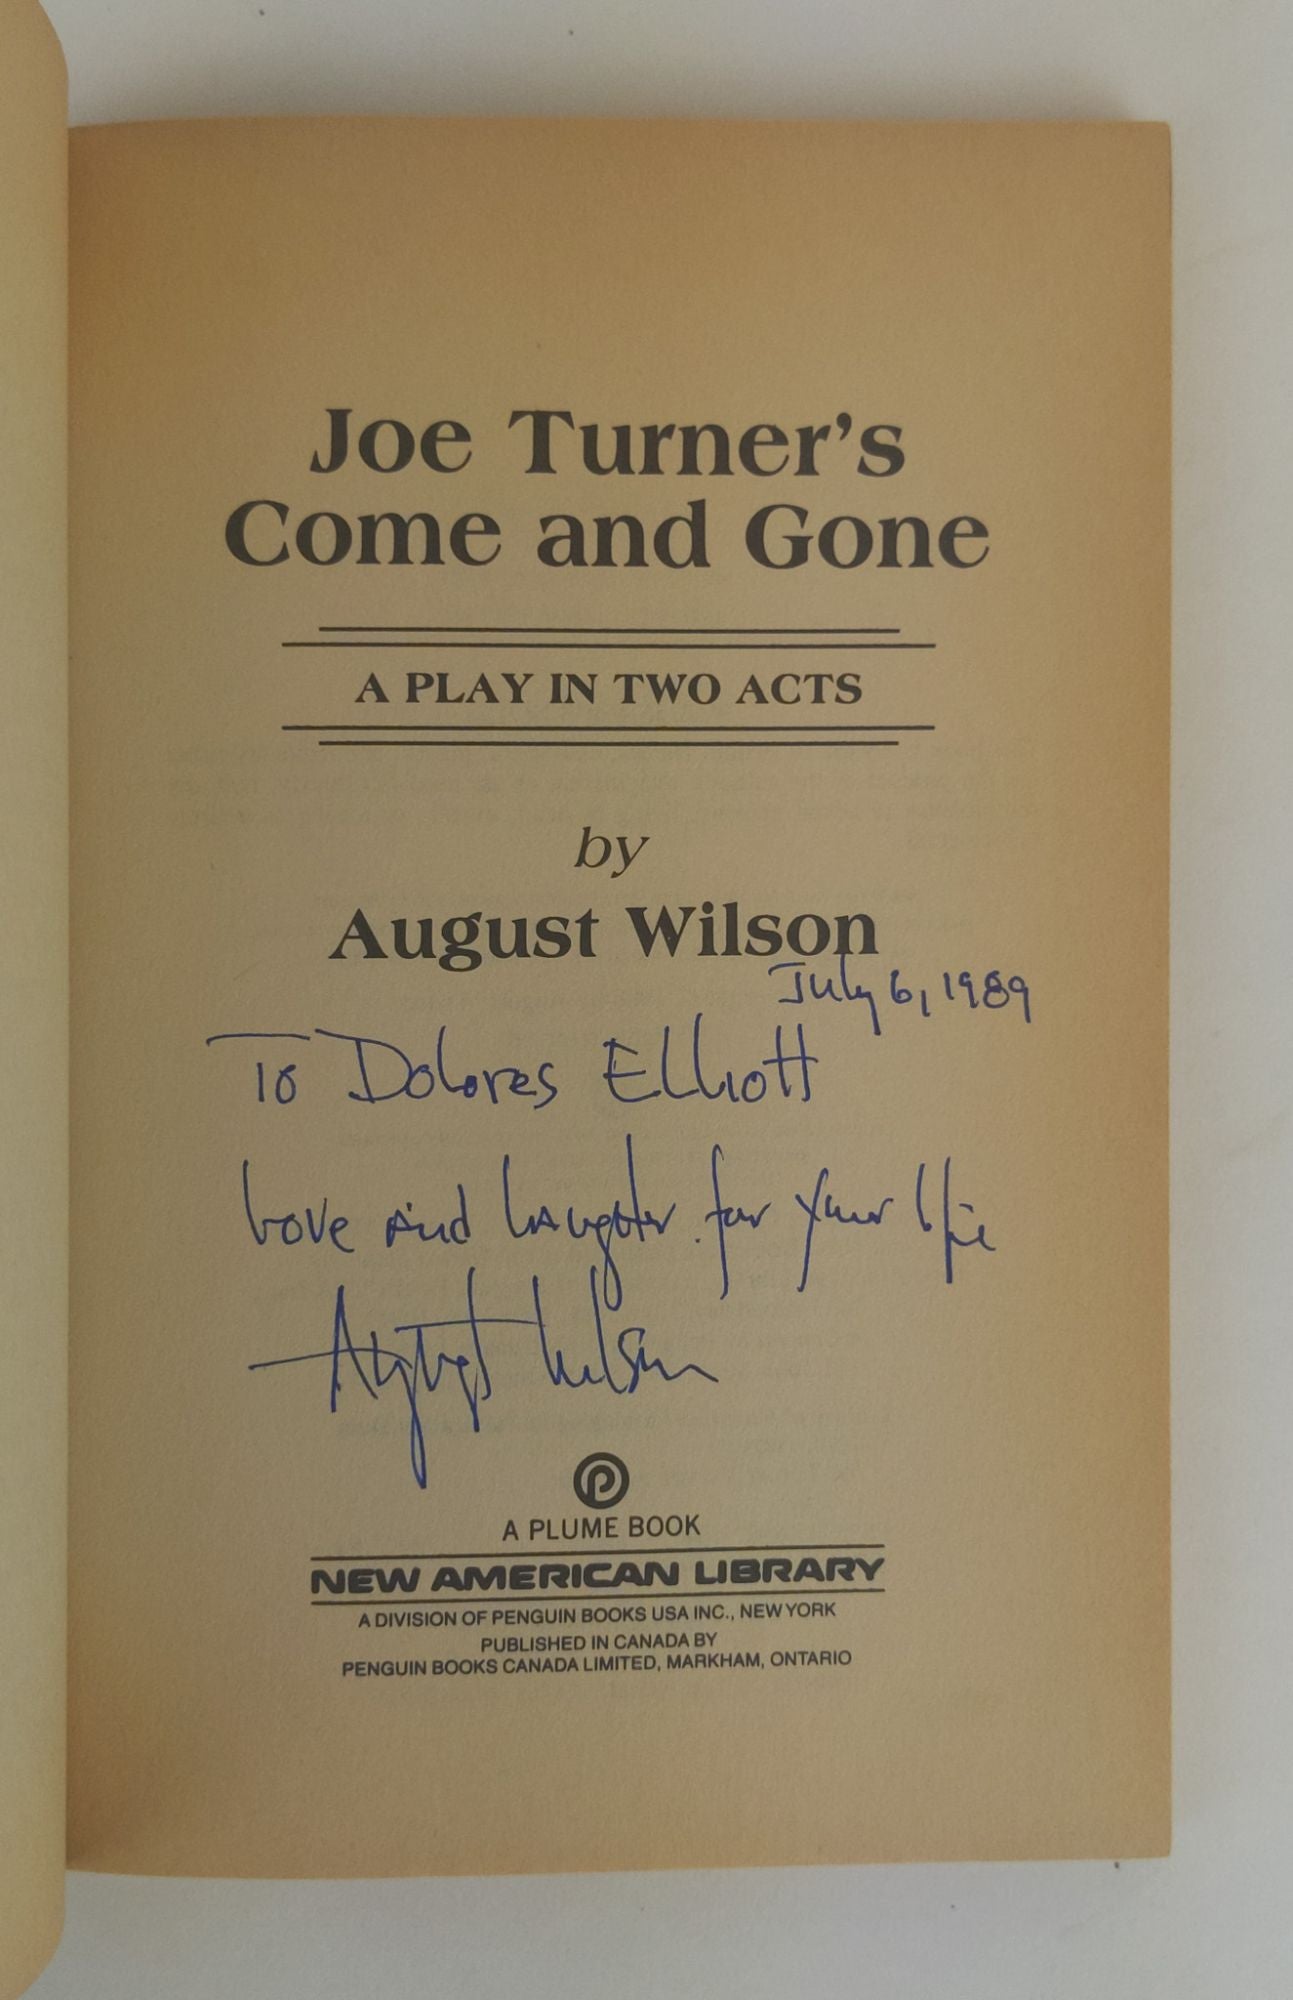 Product Image for JOE TURNER'S COME AND GONE [Signed]